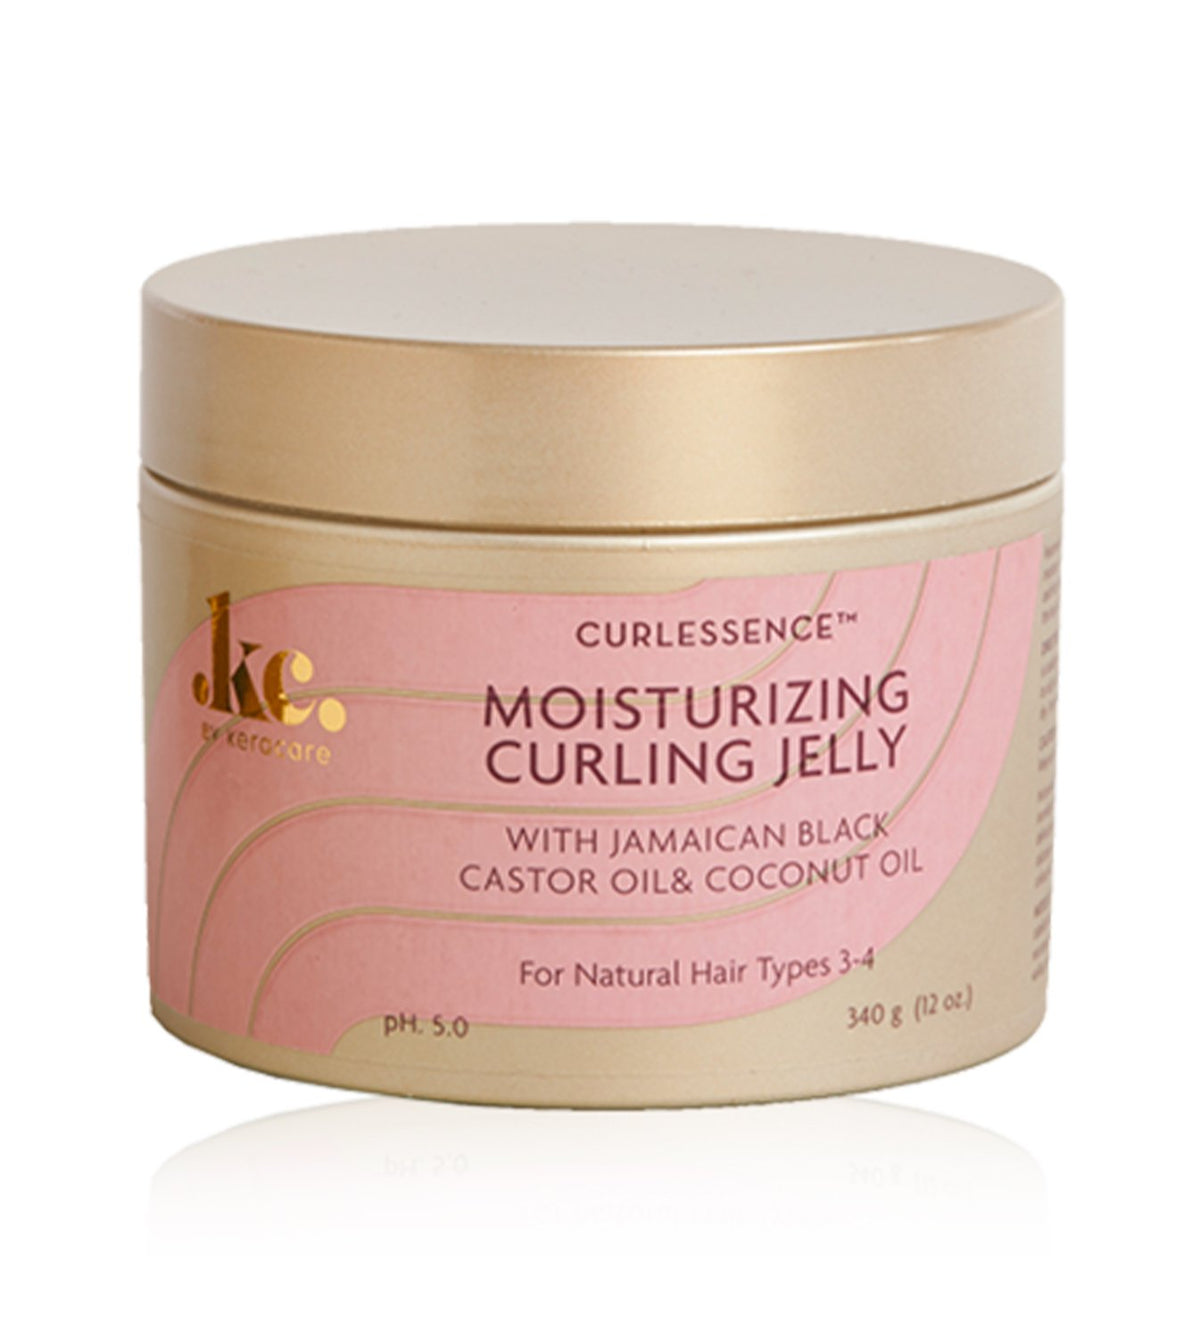 Keracare Curlessence Curling Jelly 340g - AQ Online